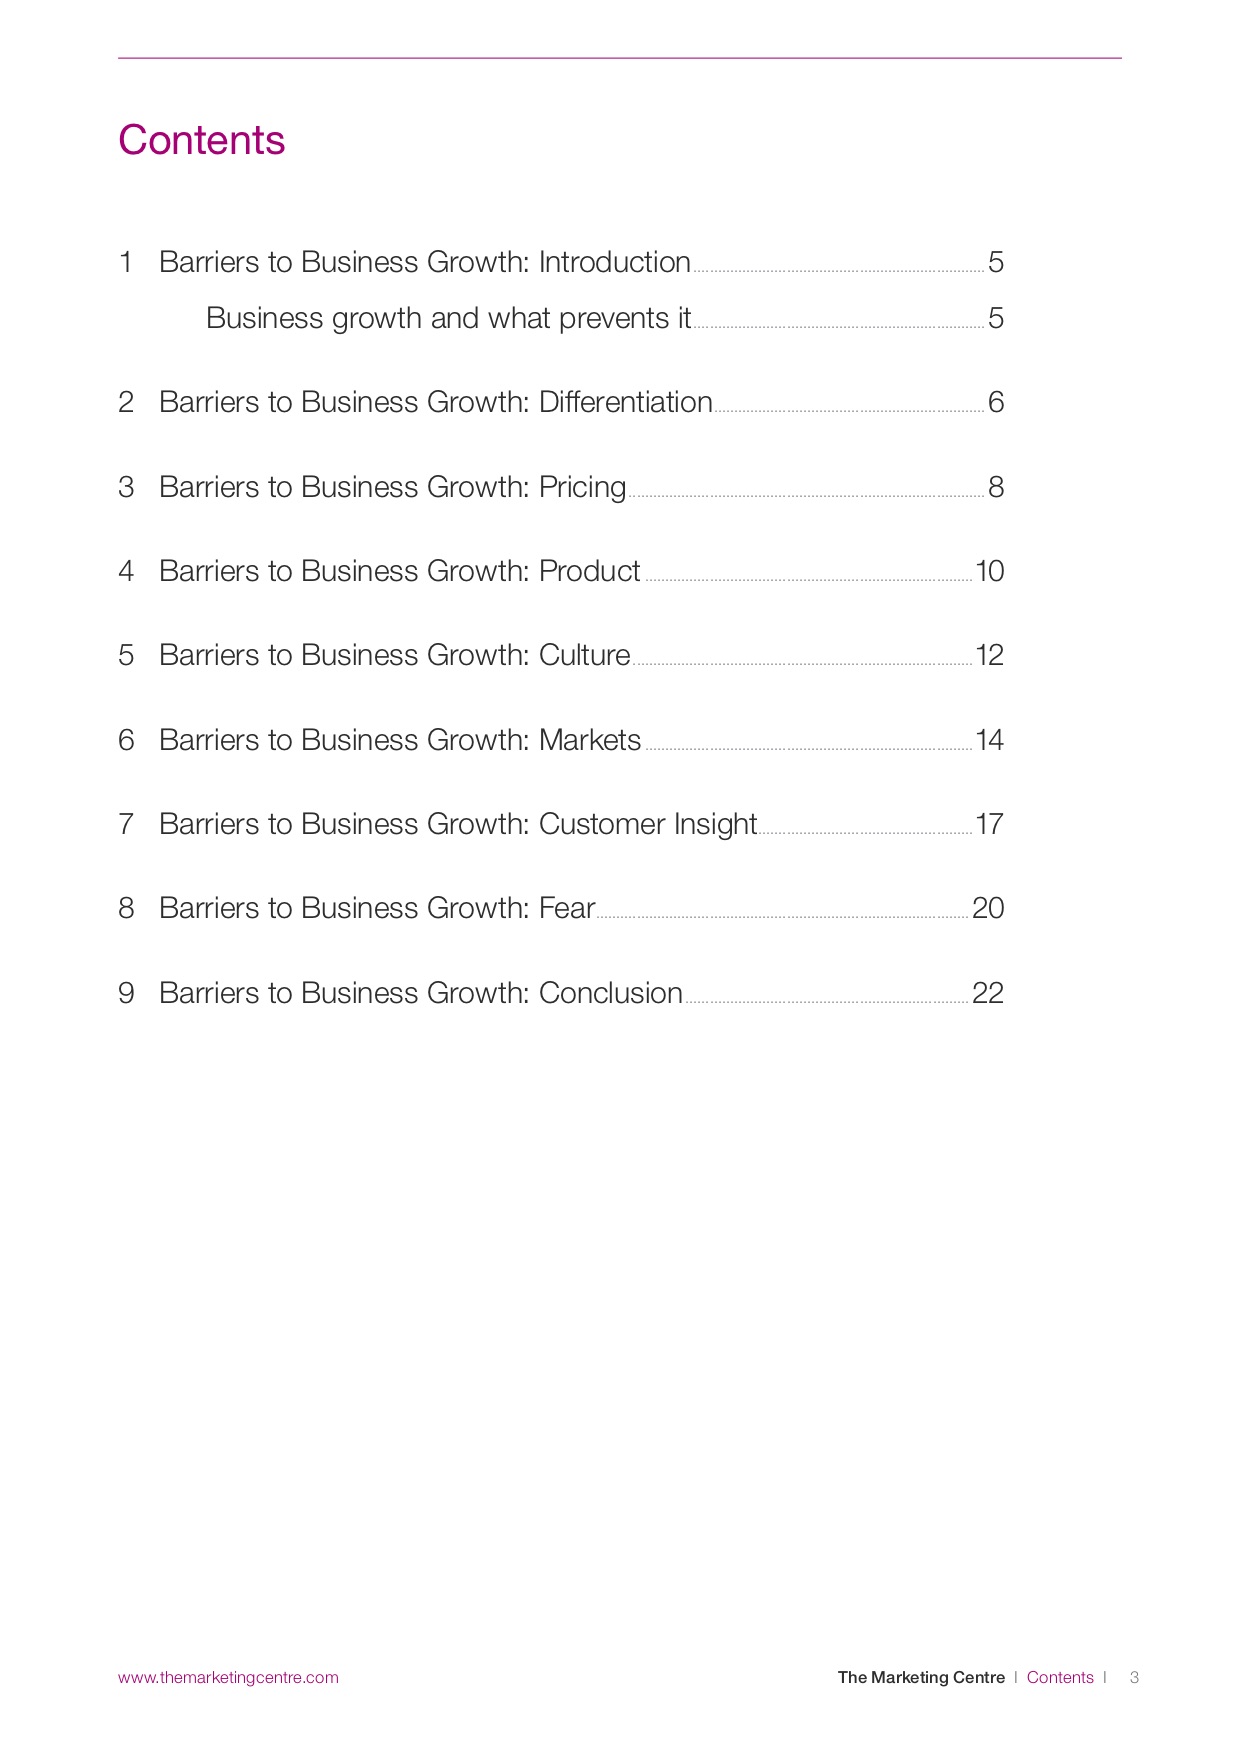 Barriers to Business Growth TOC